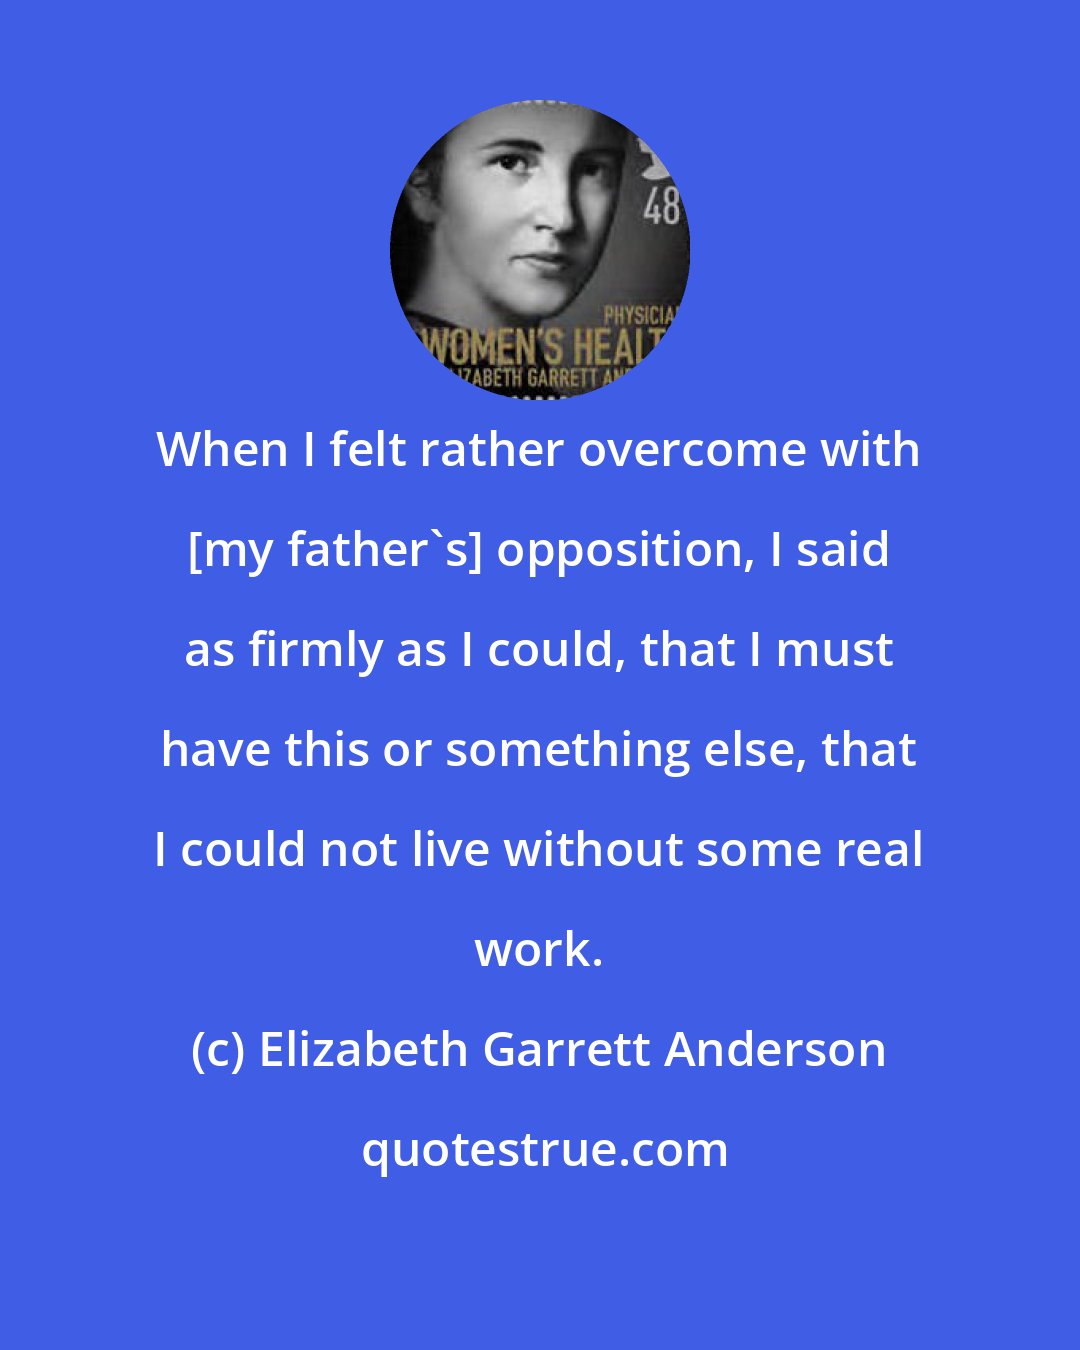 Elizabeth Garrett Anderson: When I felt rather overcome with [my father's] opposition, I said as firmly as I could, that I must have this or something else, that I could not live without some real work.